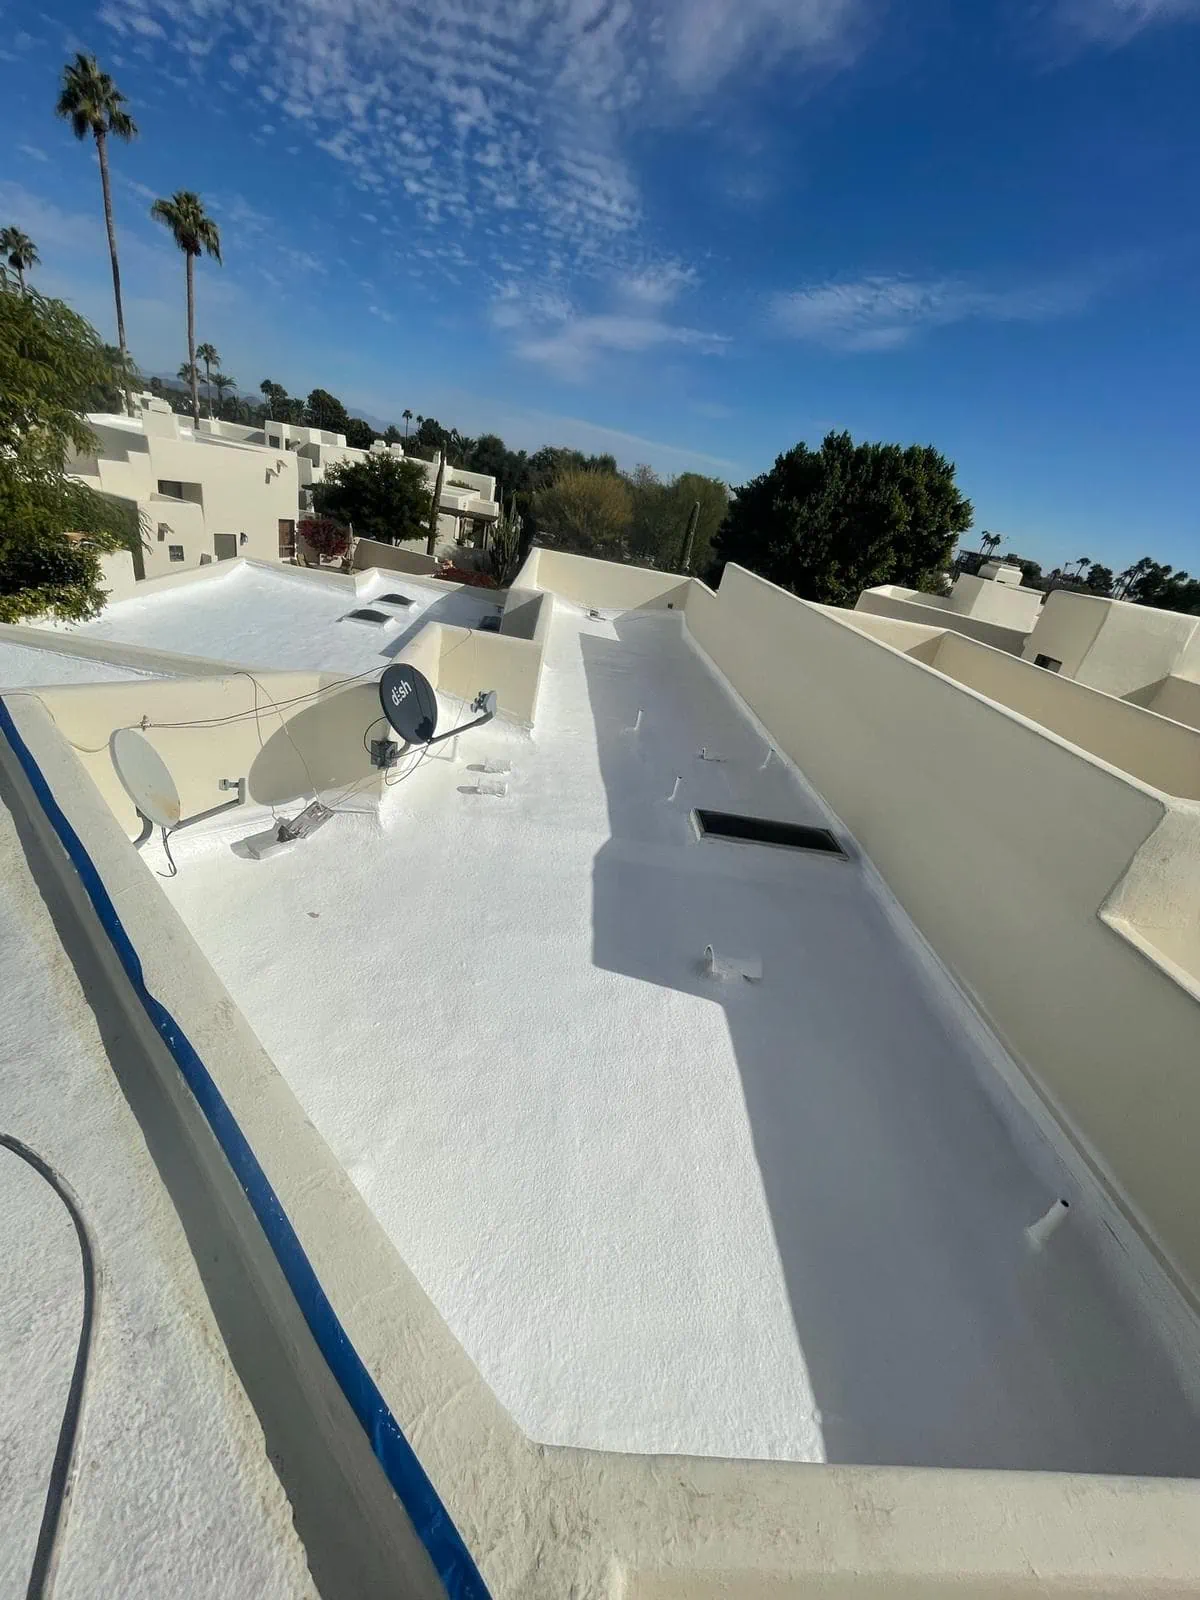 ide view of scottsdale flat roof showcasing structural integrity